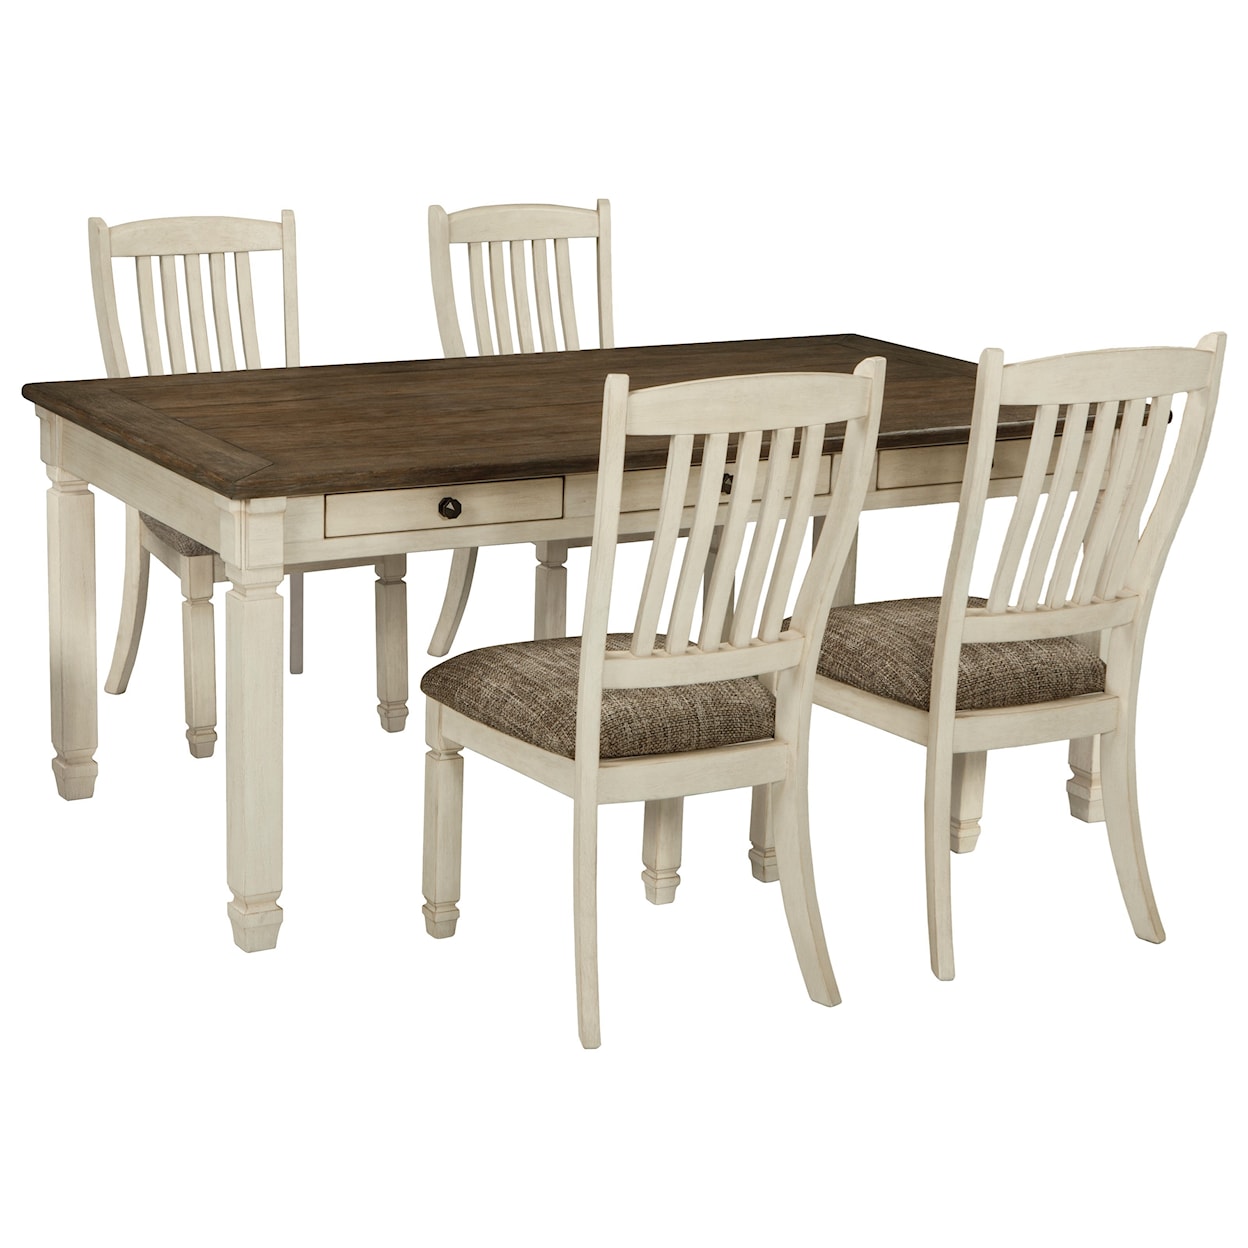 Benchcraft Bolanburg 5-Piece Table and Chair Set